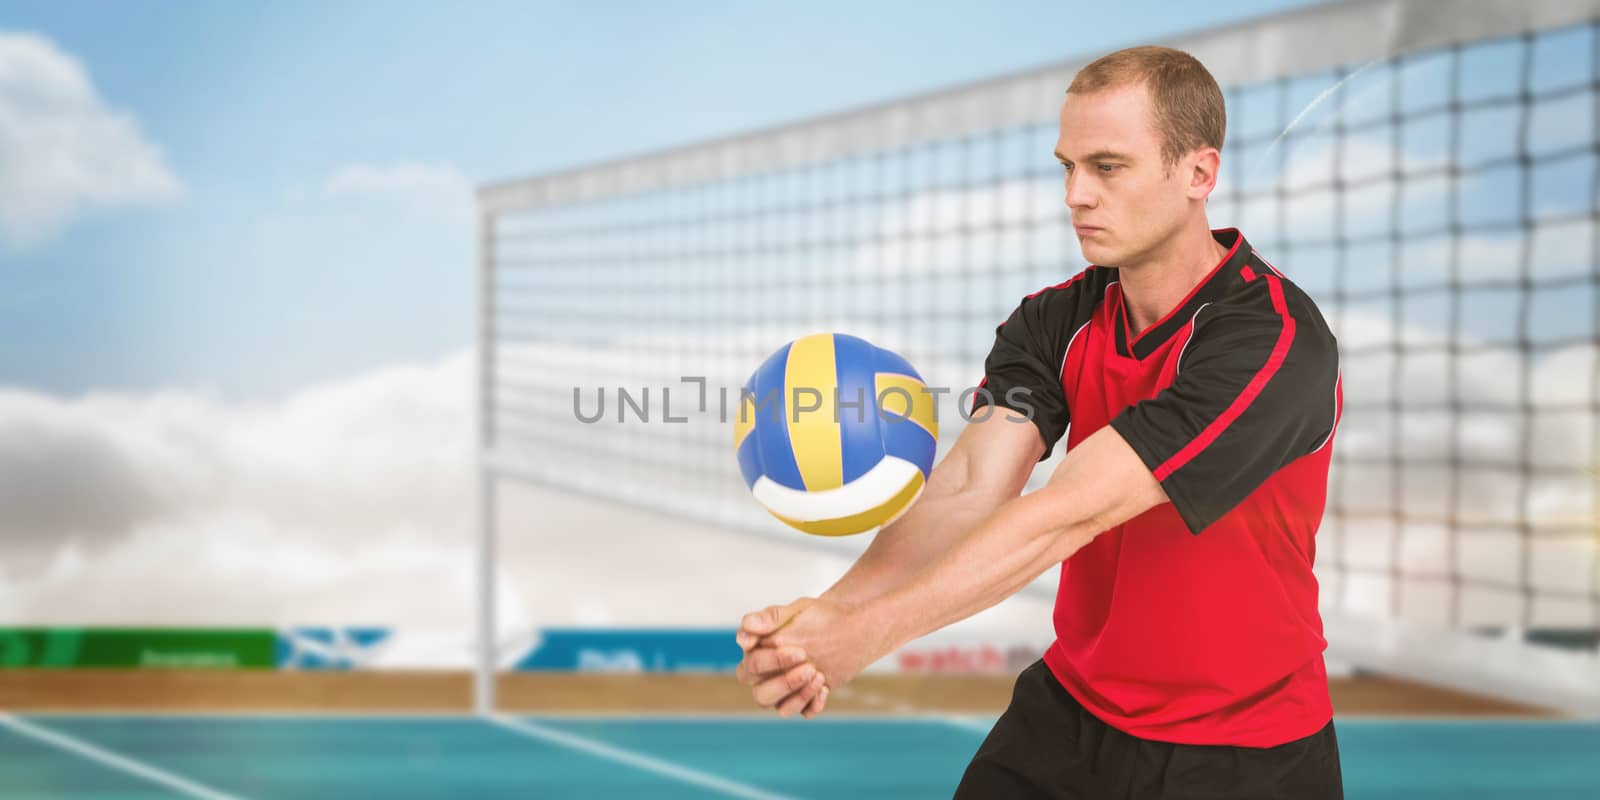 Composite image of sportsman playing a volleyball by Wavebreakmedia